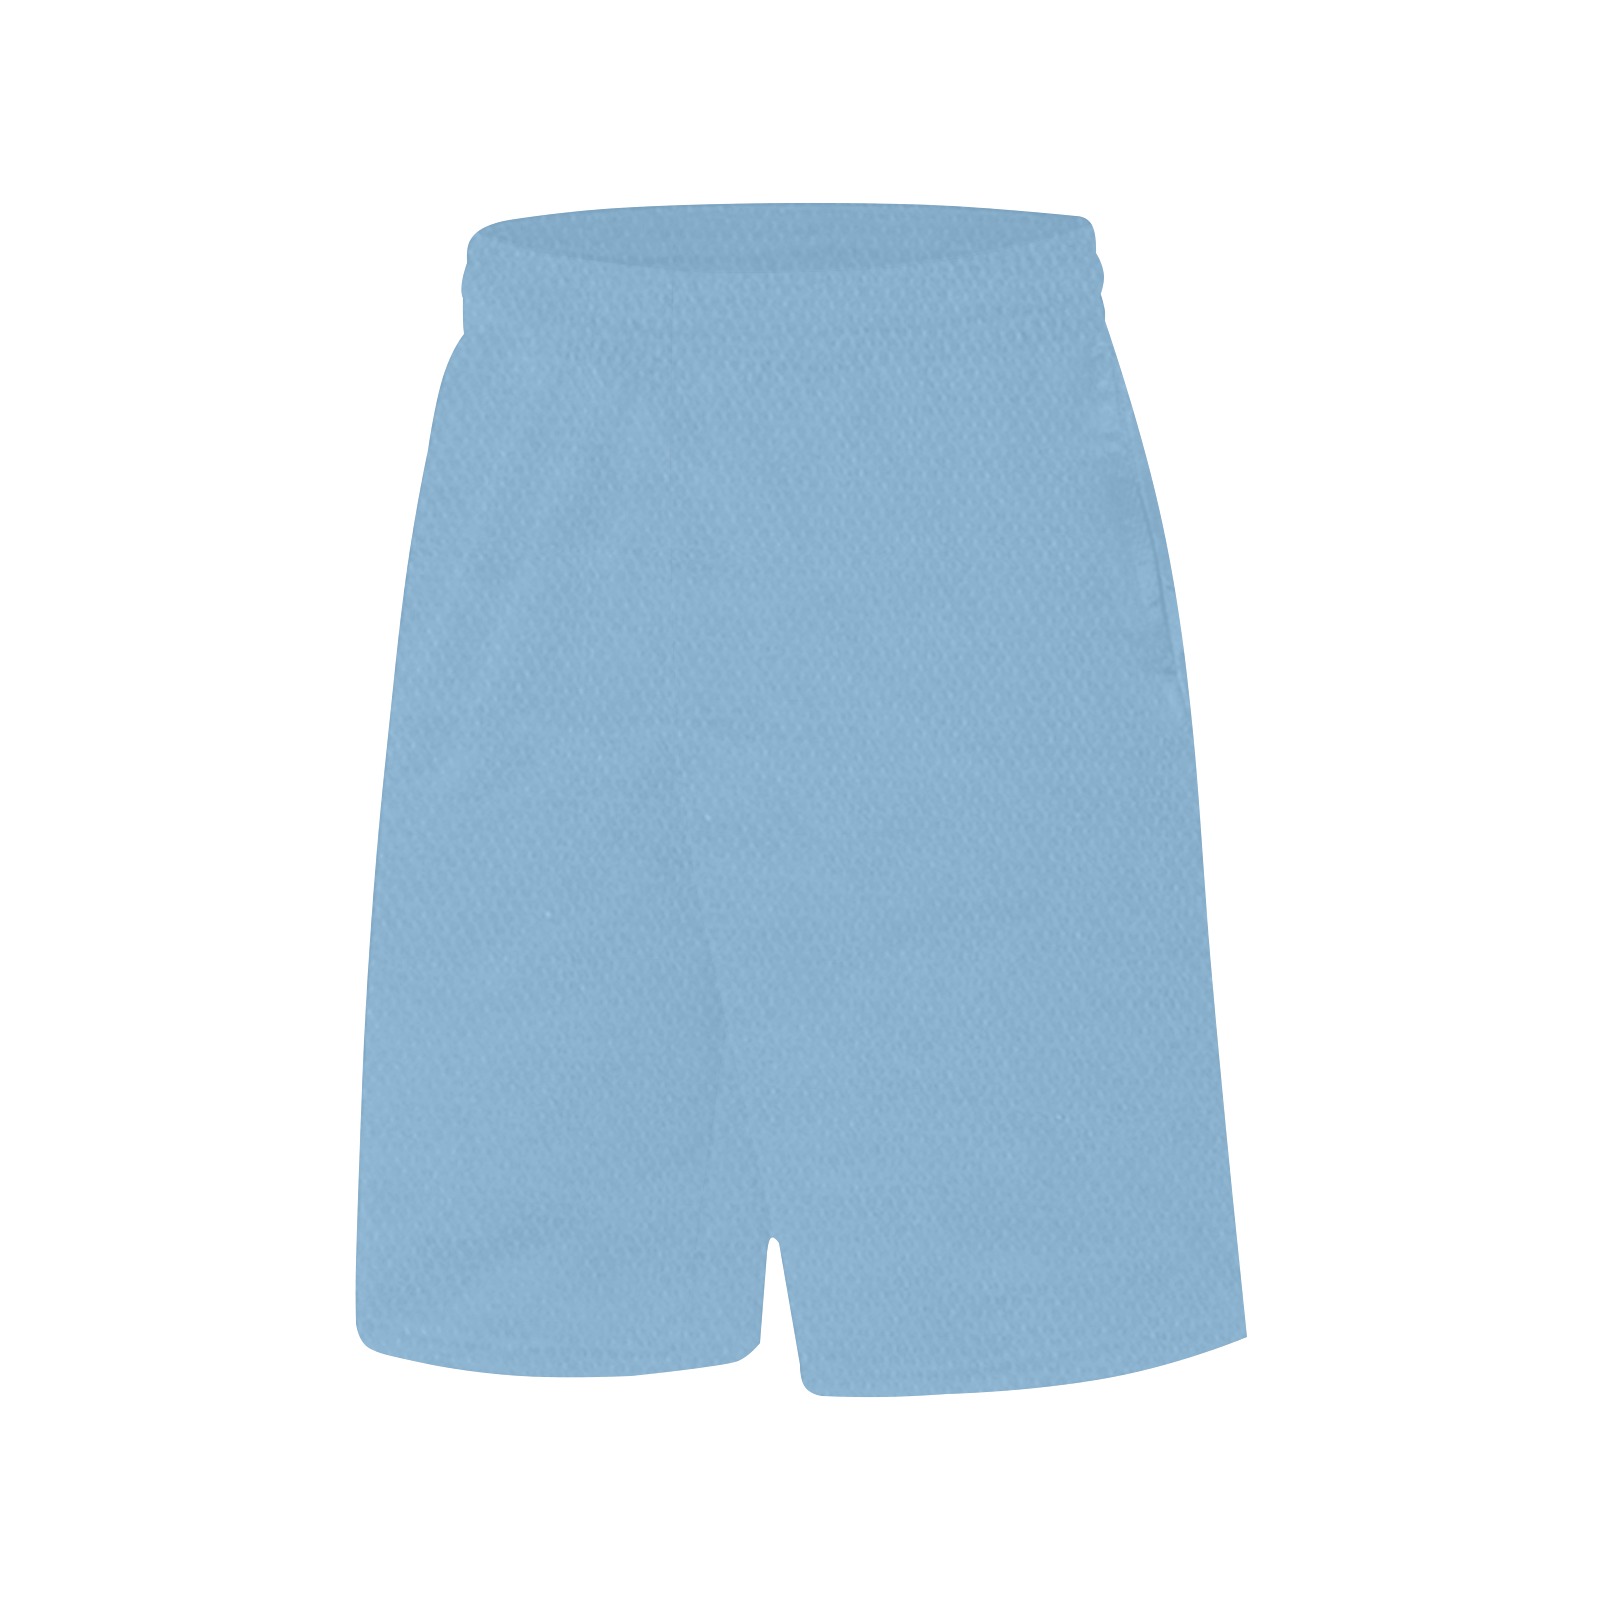 blue All Over Print Basketball Shorts with Pocket